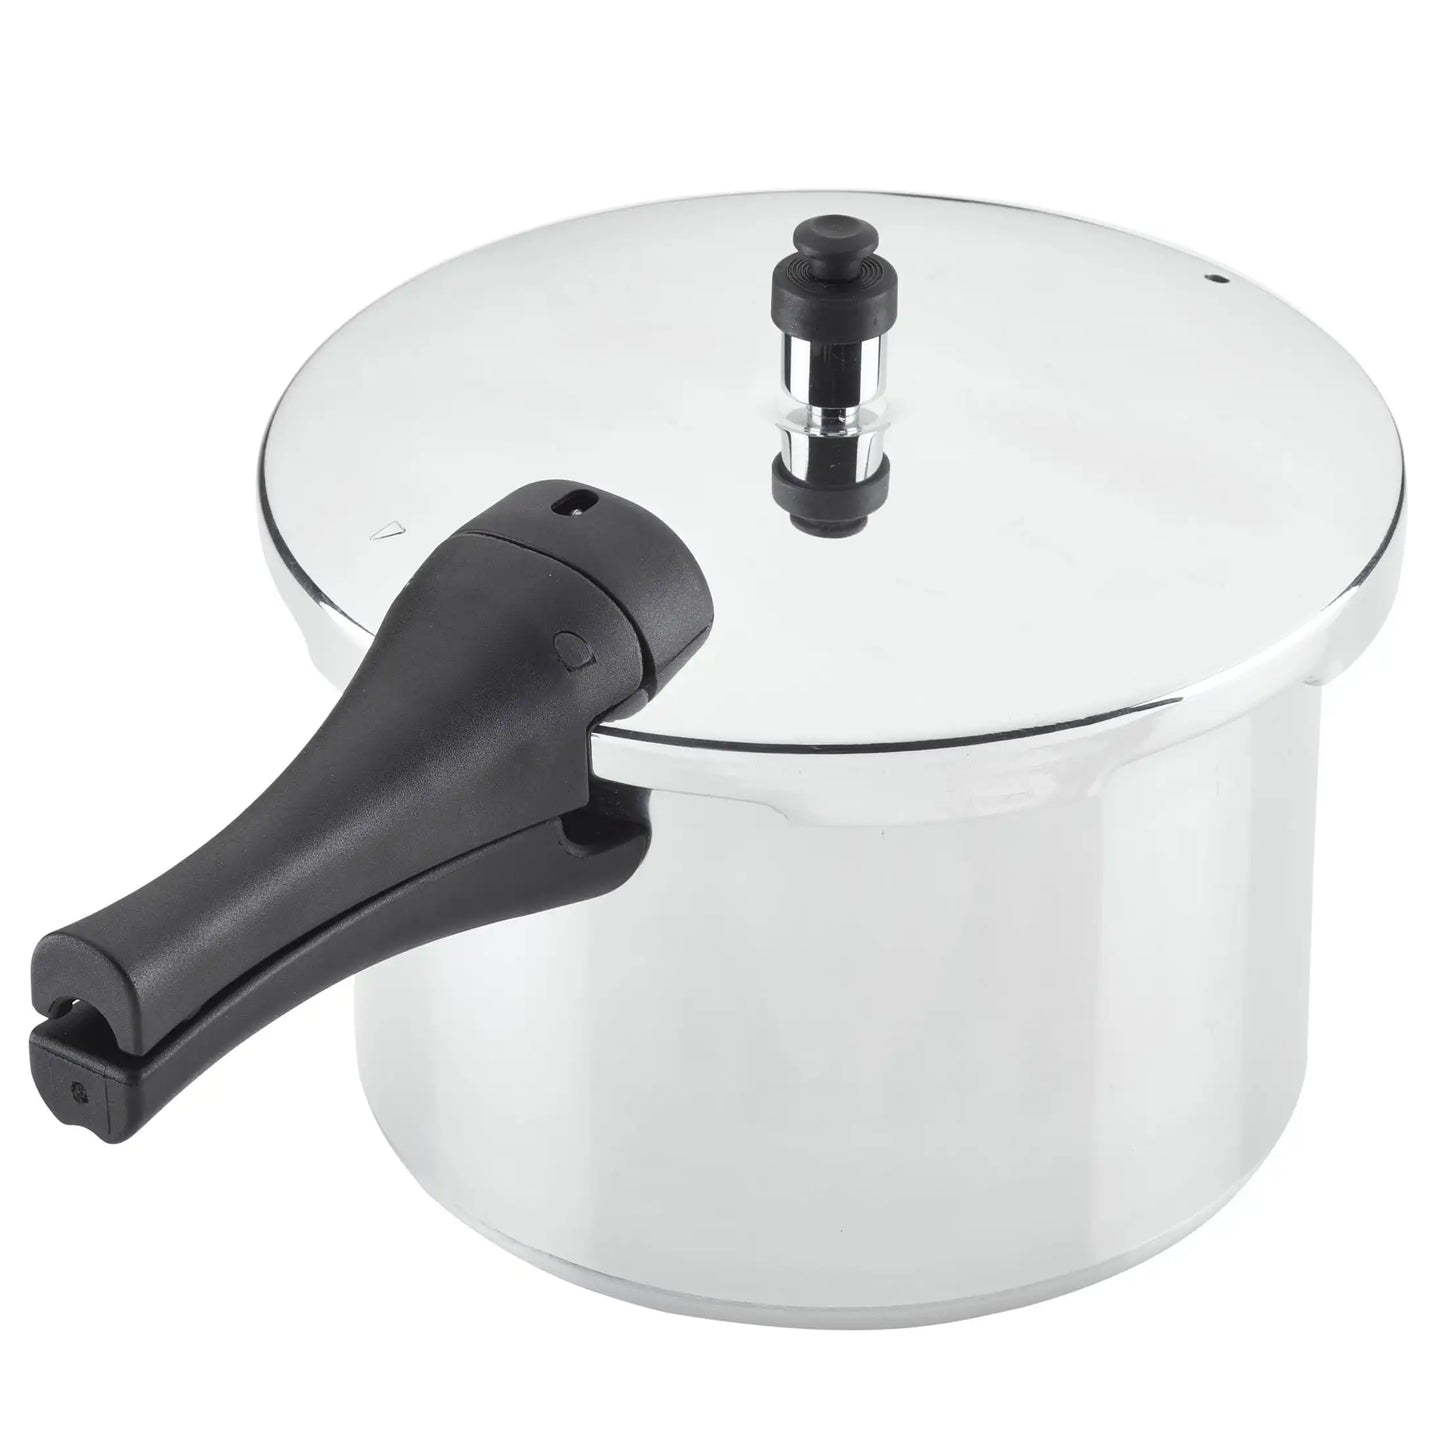 Aluminum Stovetop Pressure Cooker
6 Quart
Safe
Durable
Easy To Clean